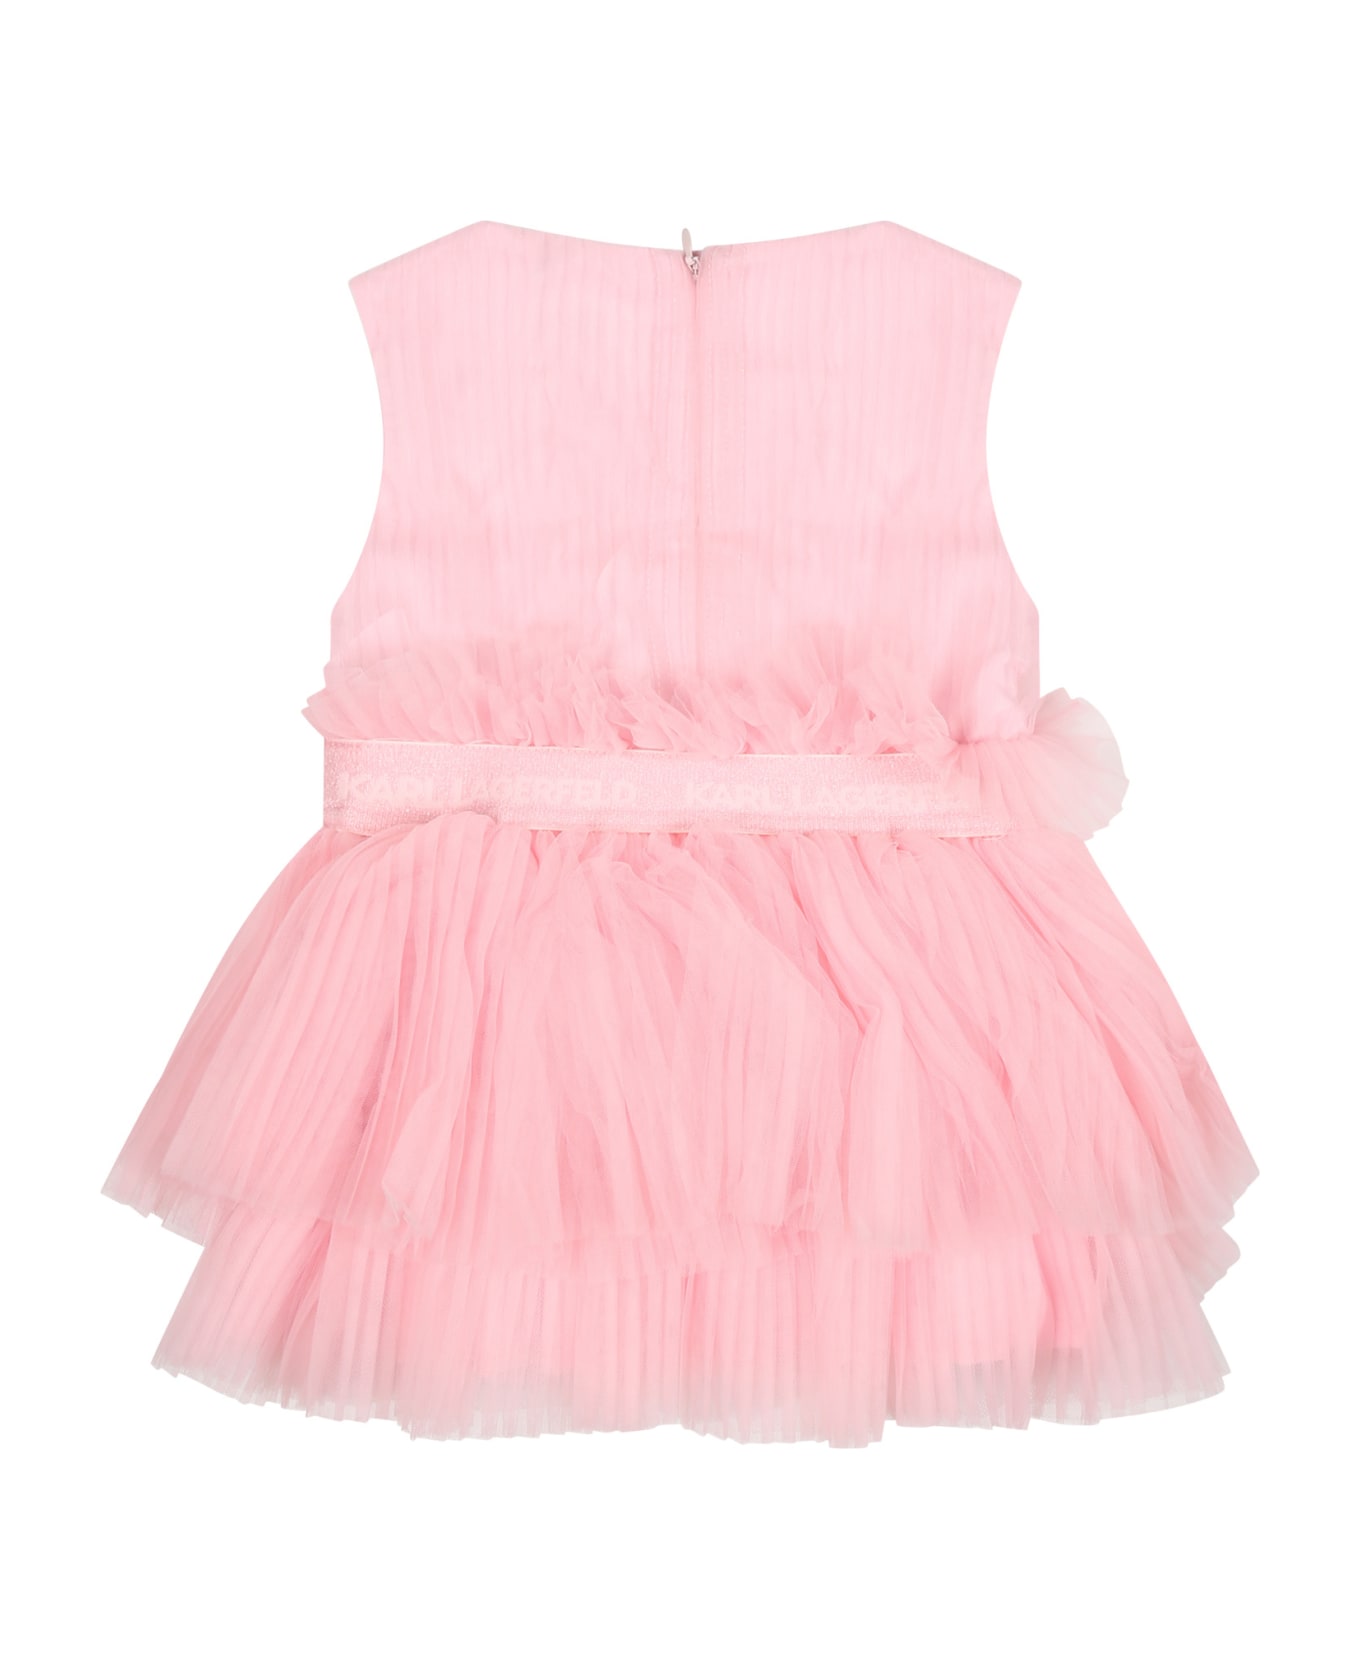 Karl Lagerfeld Kids Pink Dress For Baby Girl With Logo - Pink ウェア